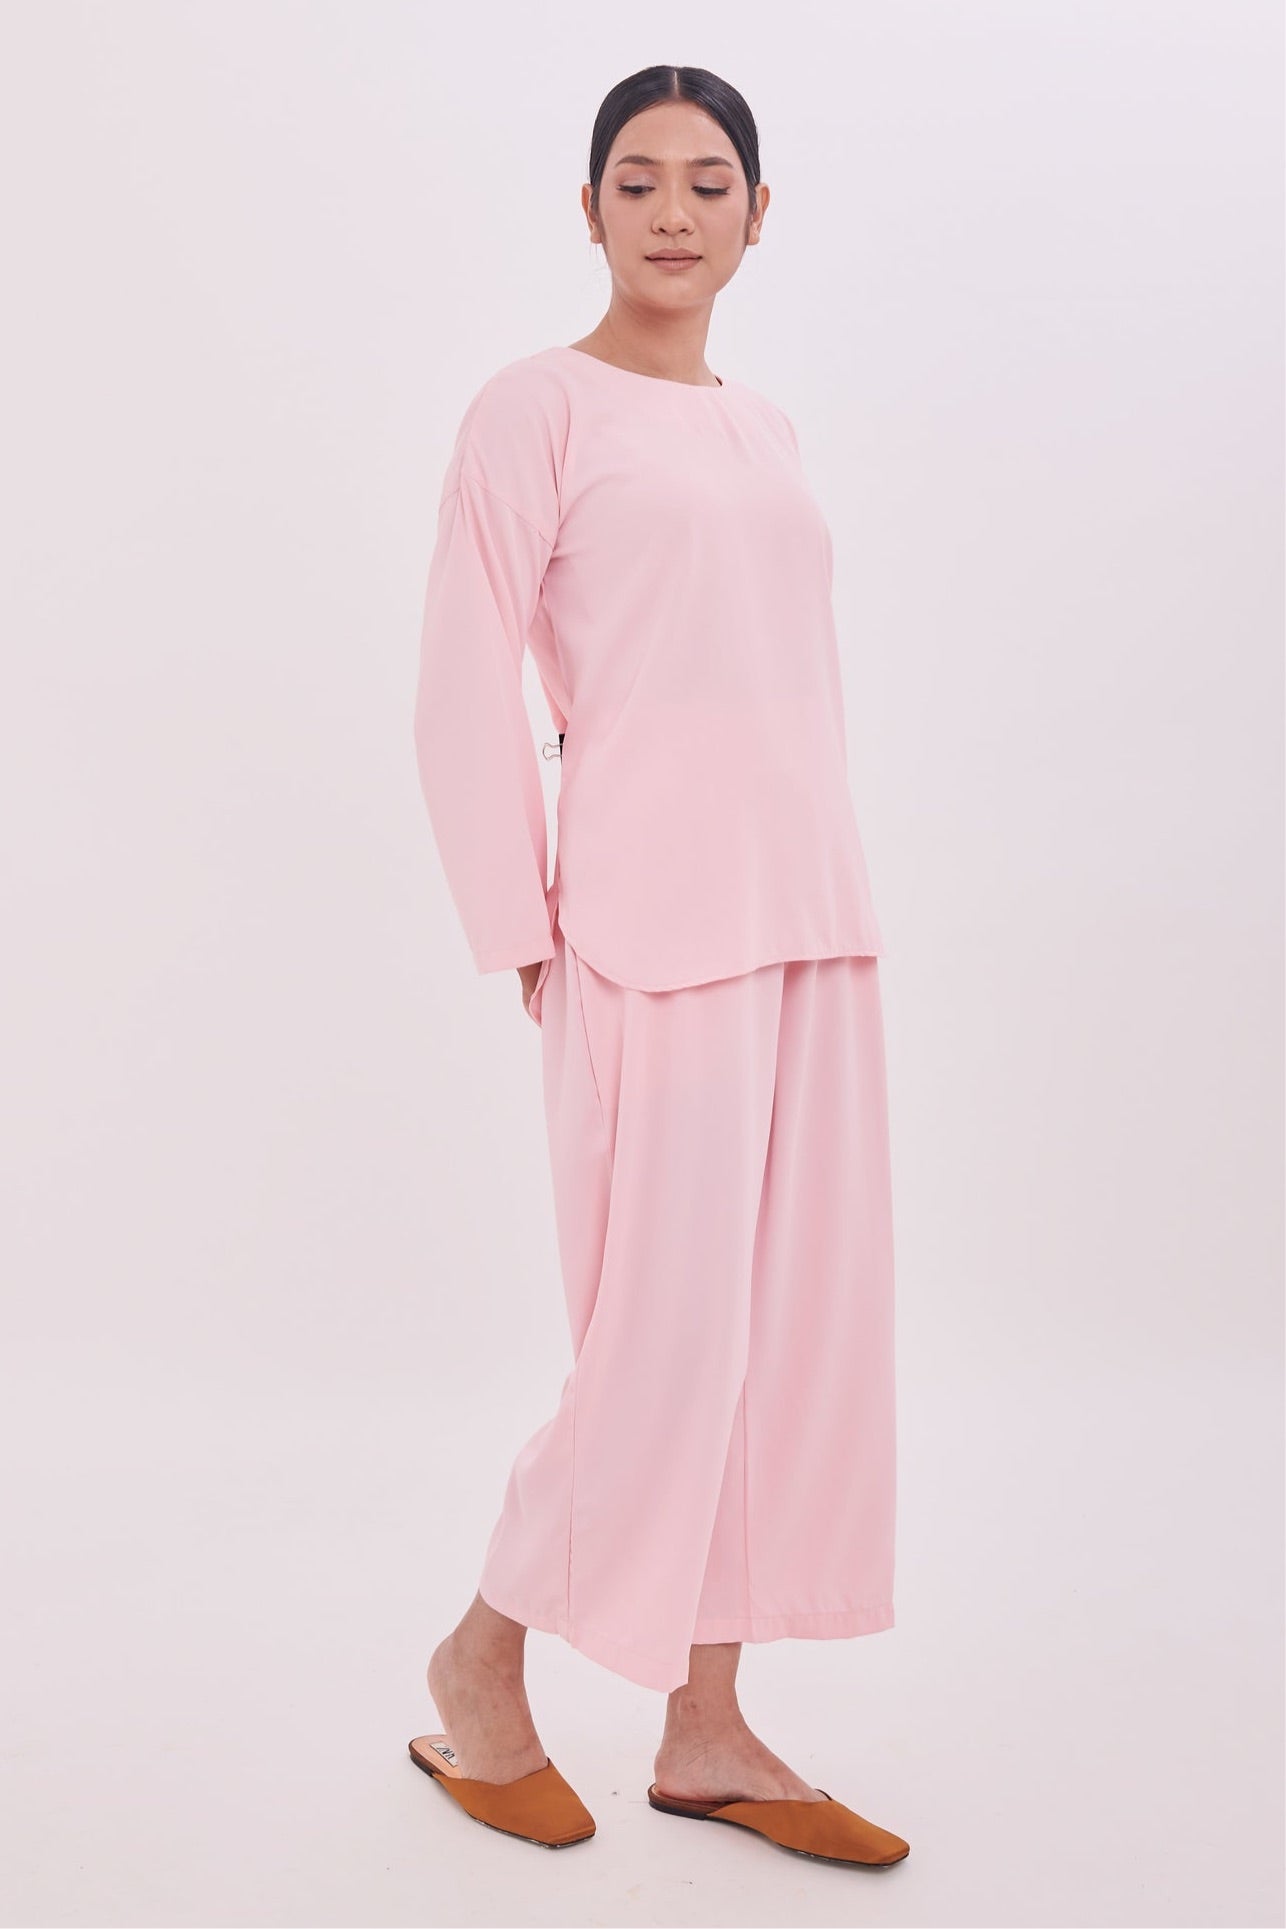 Edza Top in Pink